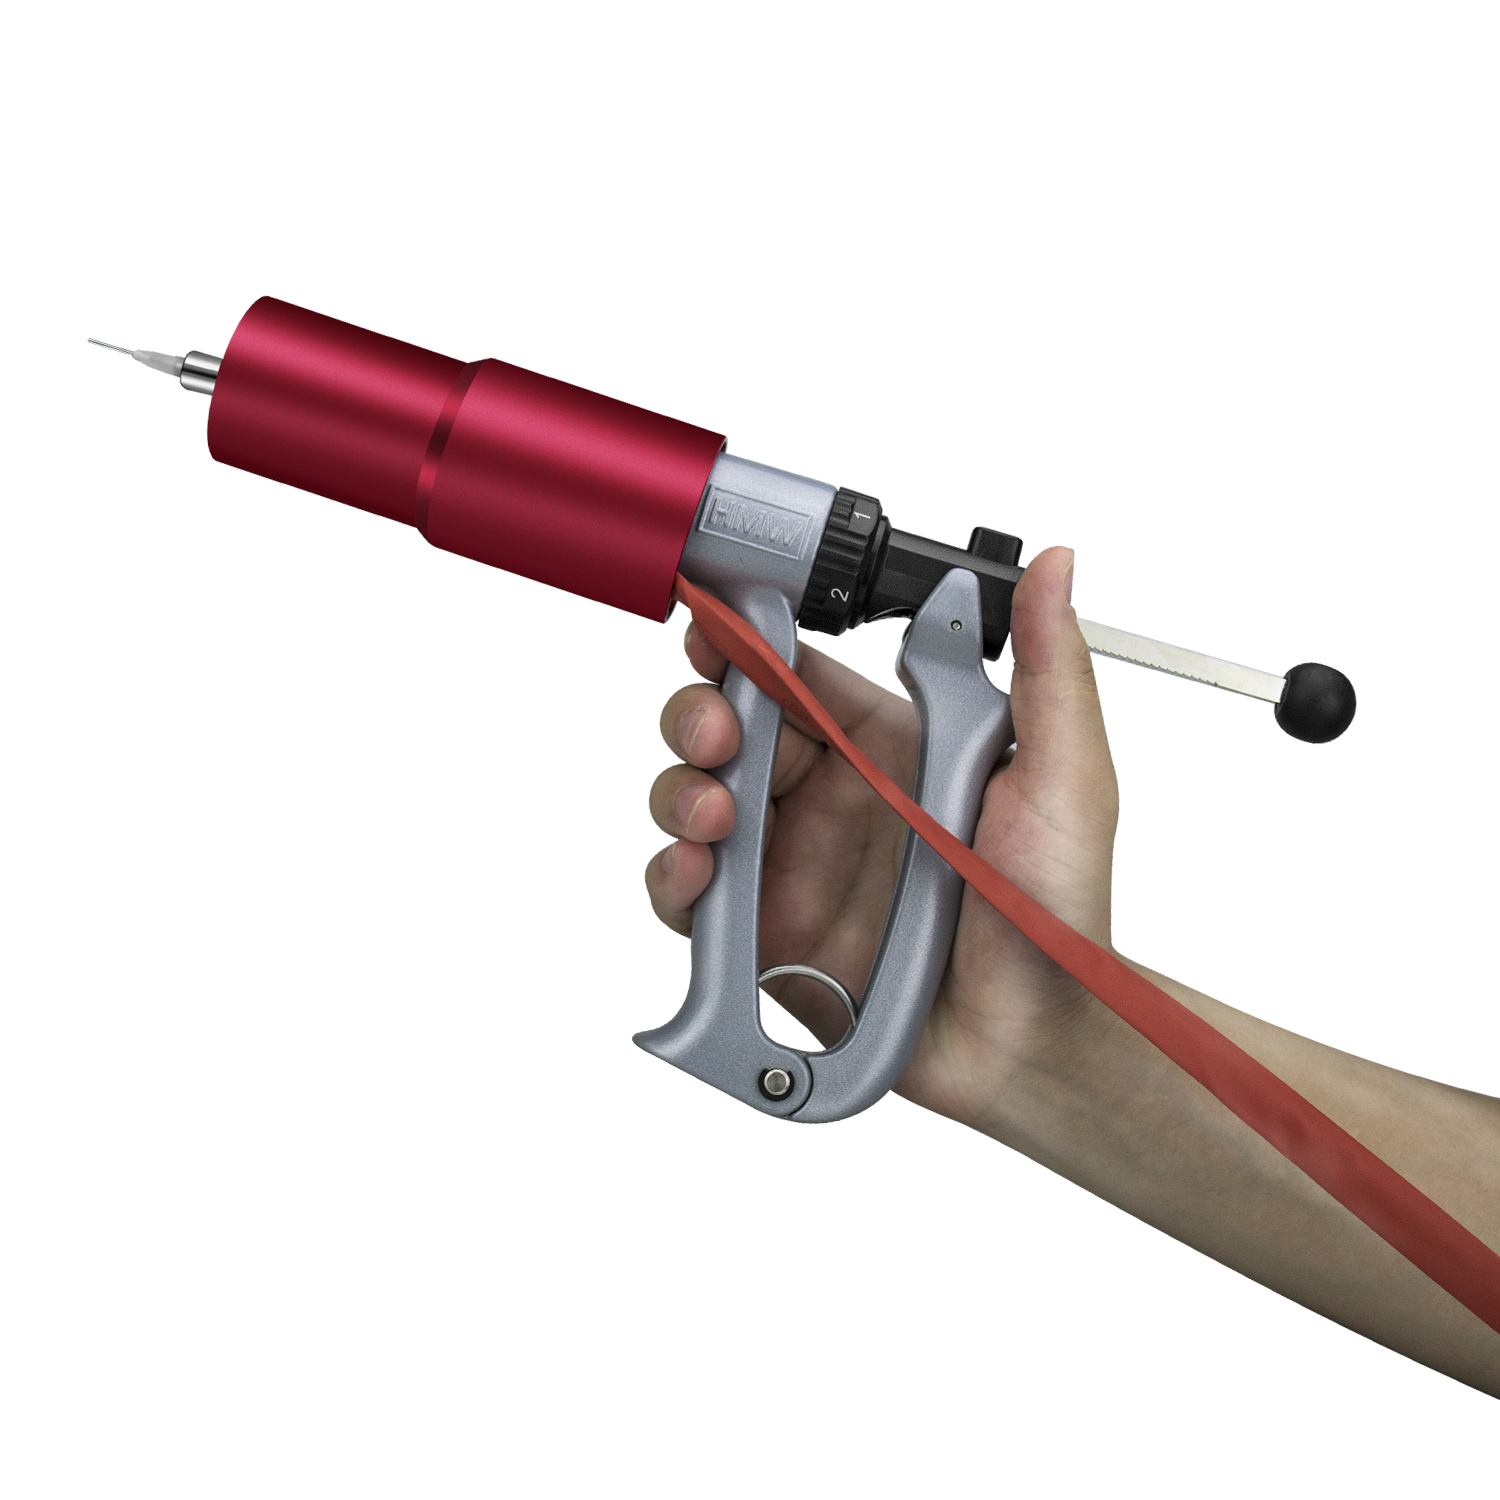 A person's hand holding DM Lift cartridge filler gun with red barrel and silver receiver as well as a black charging handle